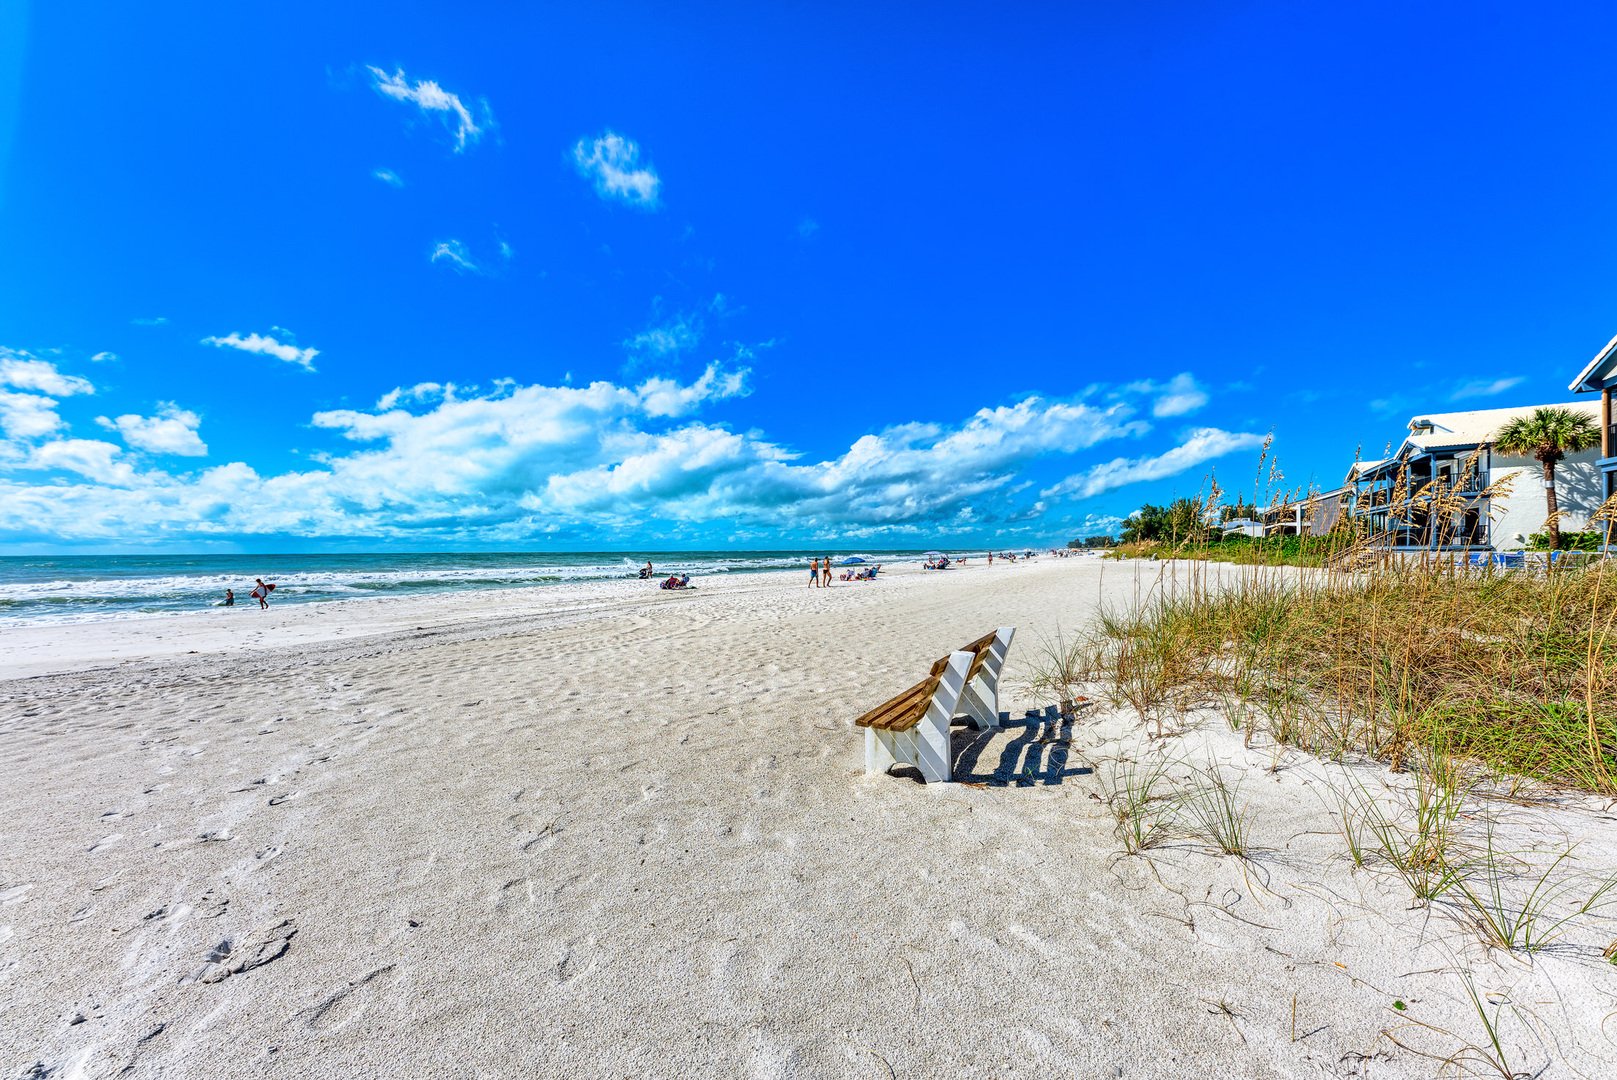 Some of the best Anna Maria Island attractions include the many beaches on the island.